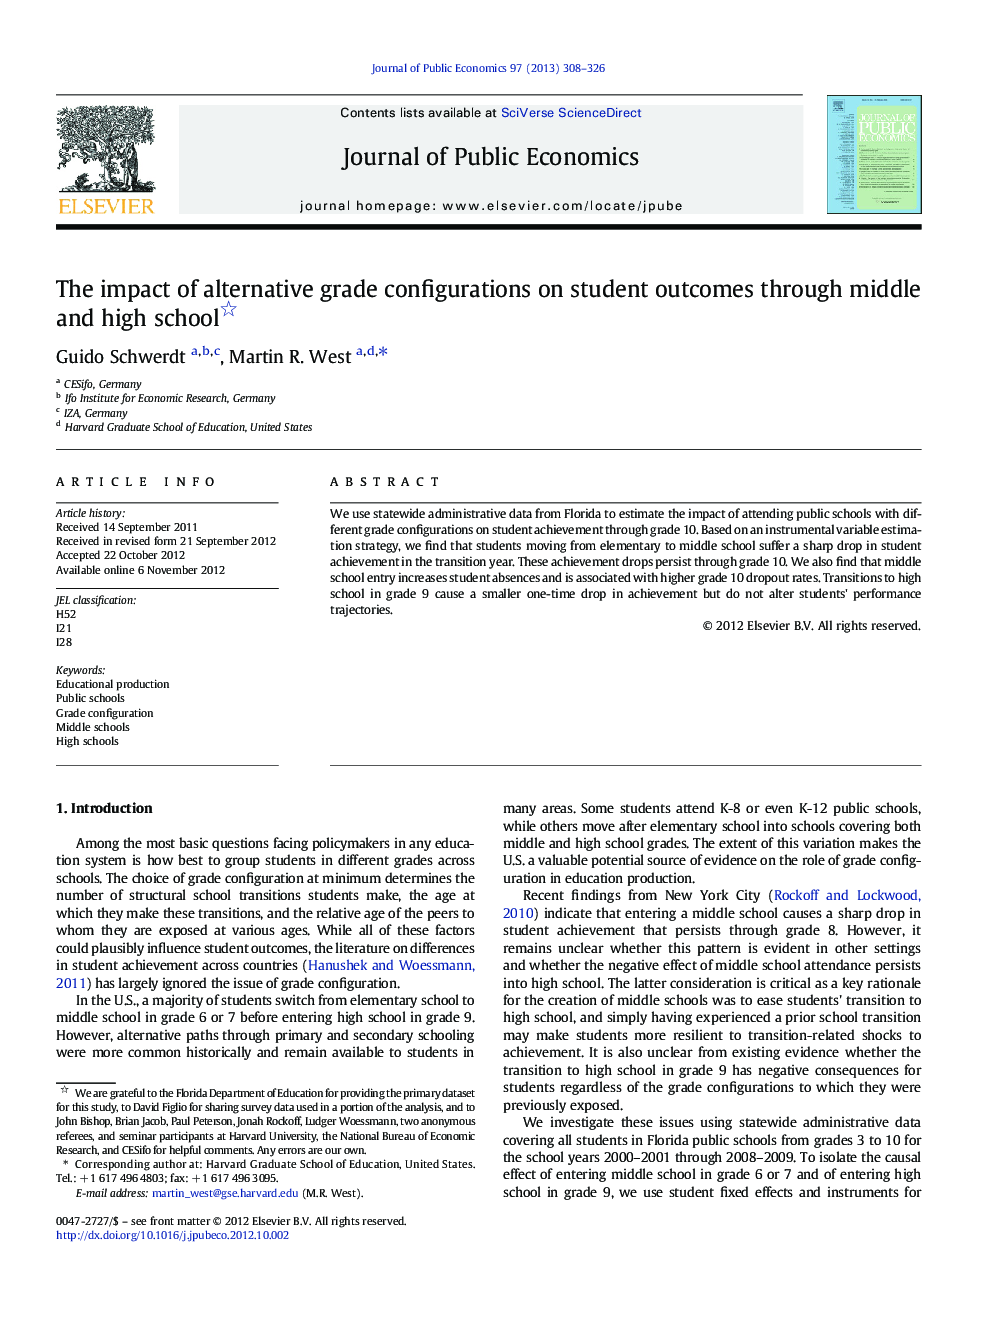 The impact of alternative grade configurations on student outcomes through middle and high school 